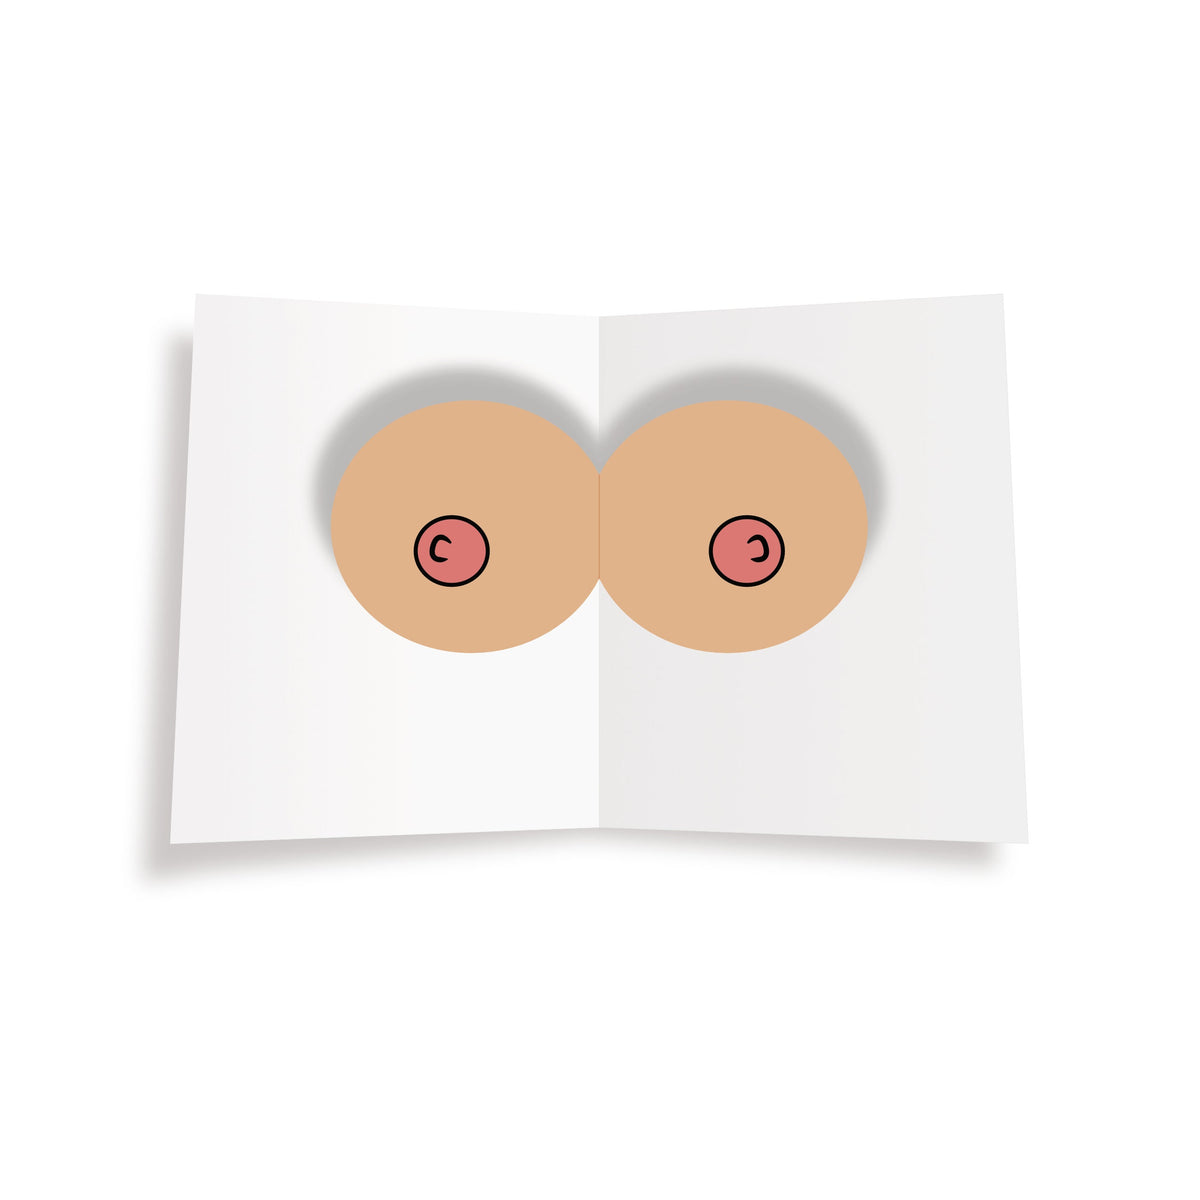 Tits Your Birthday - 3D Pop Up Boob Card